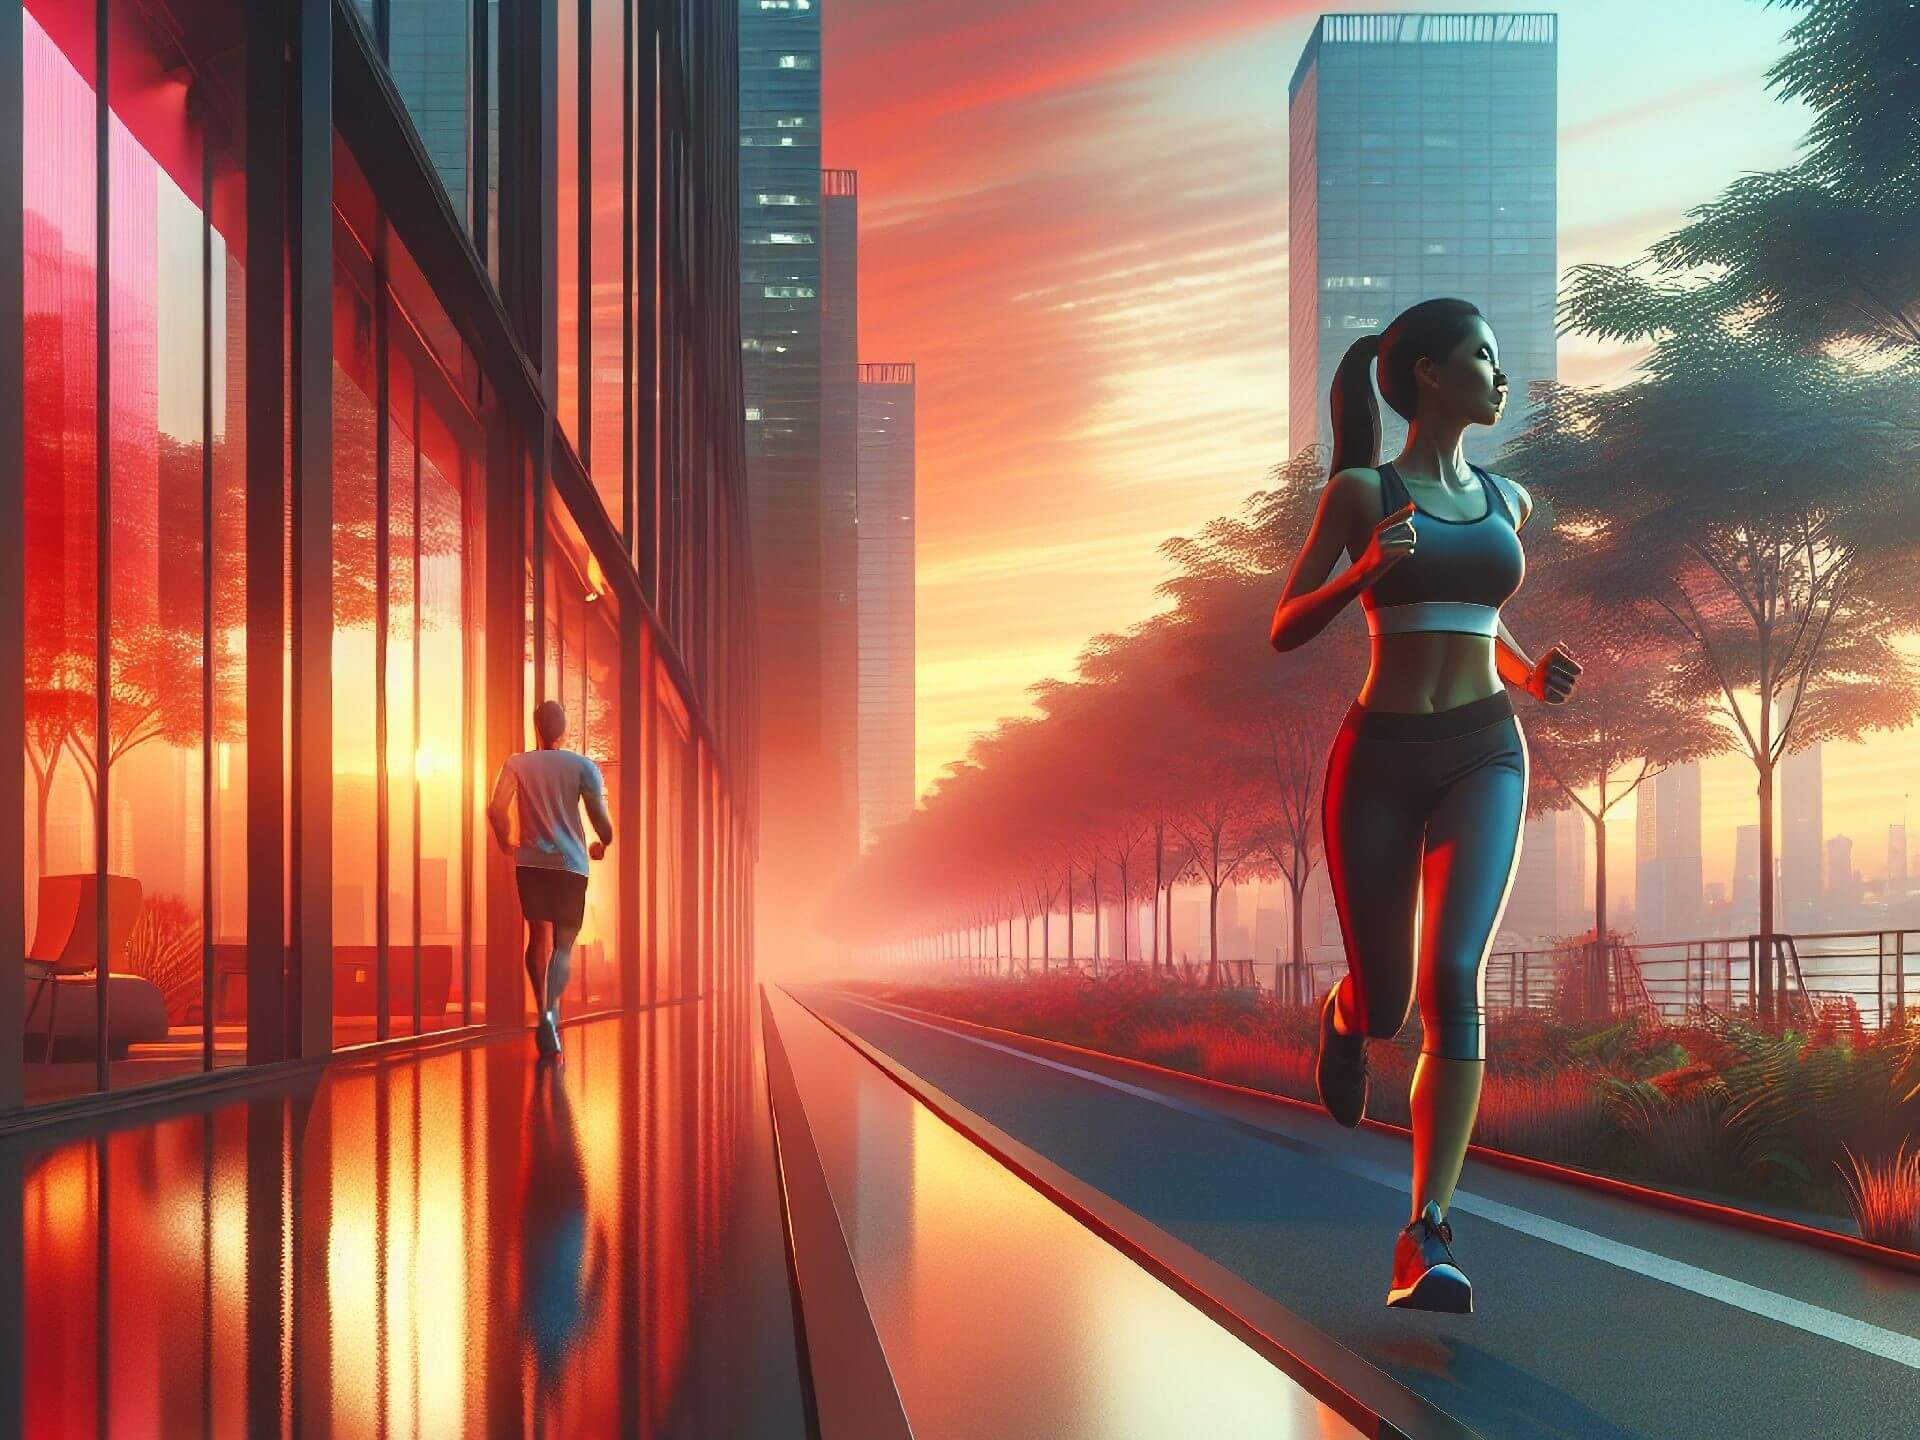 Two people jogging through a city at sunrise, going in opposite directions